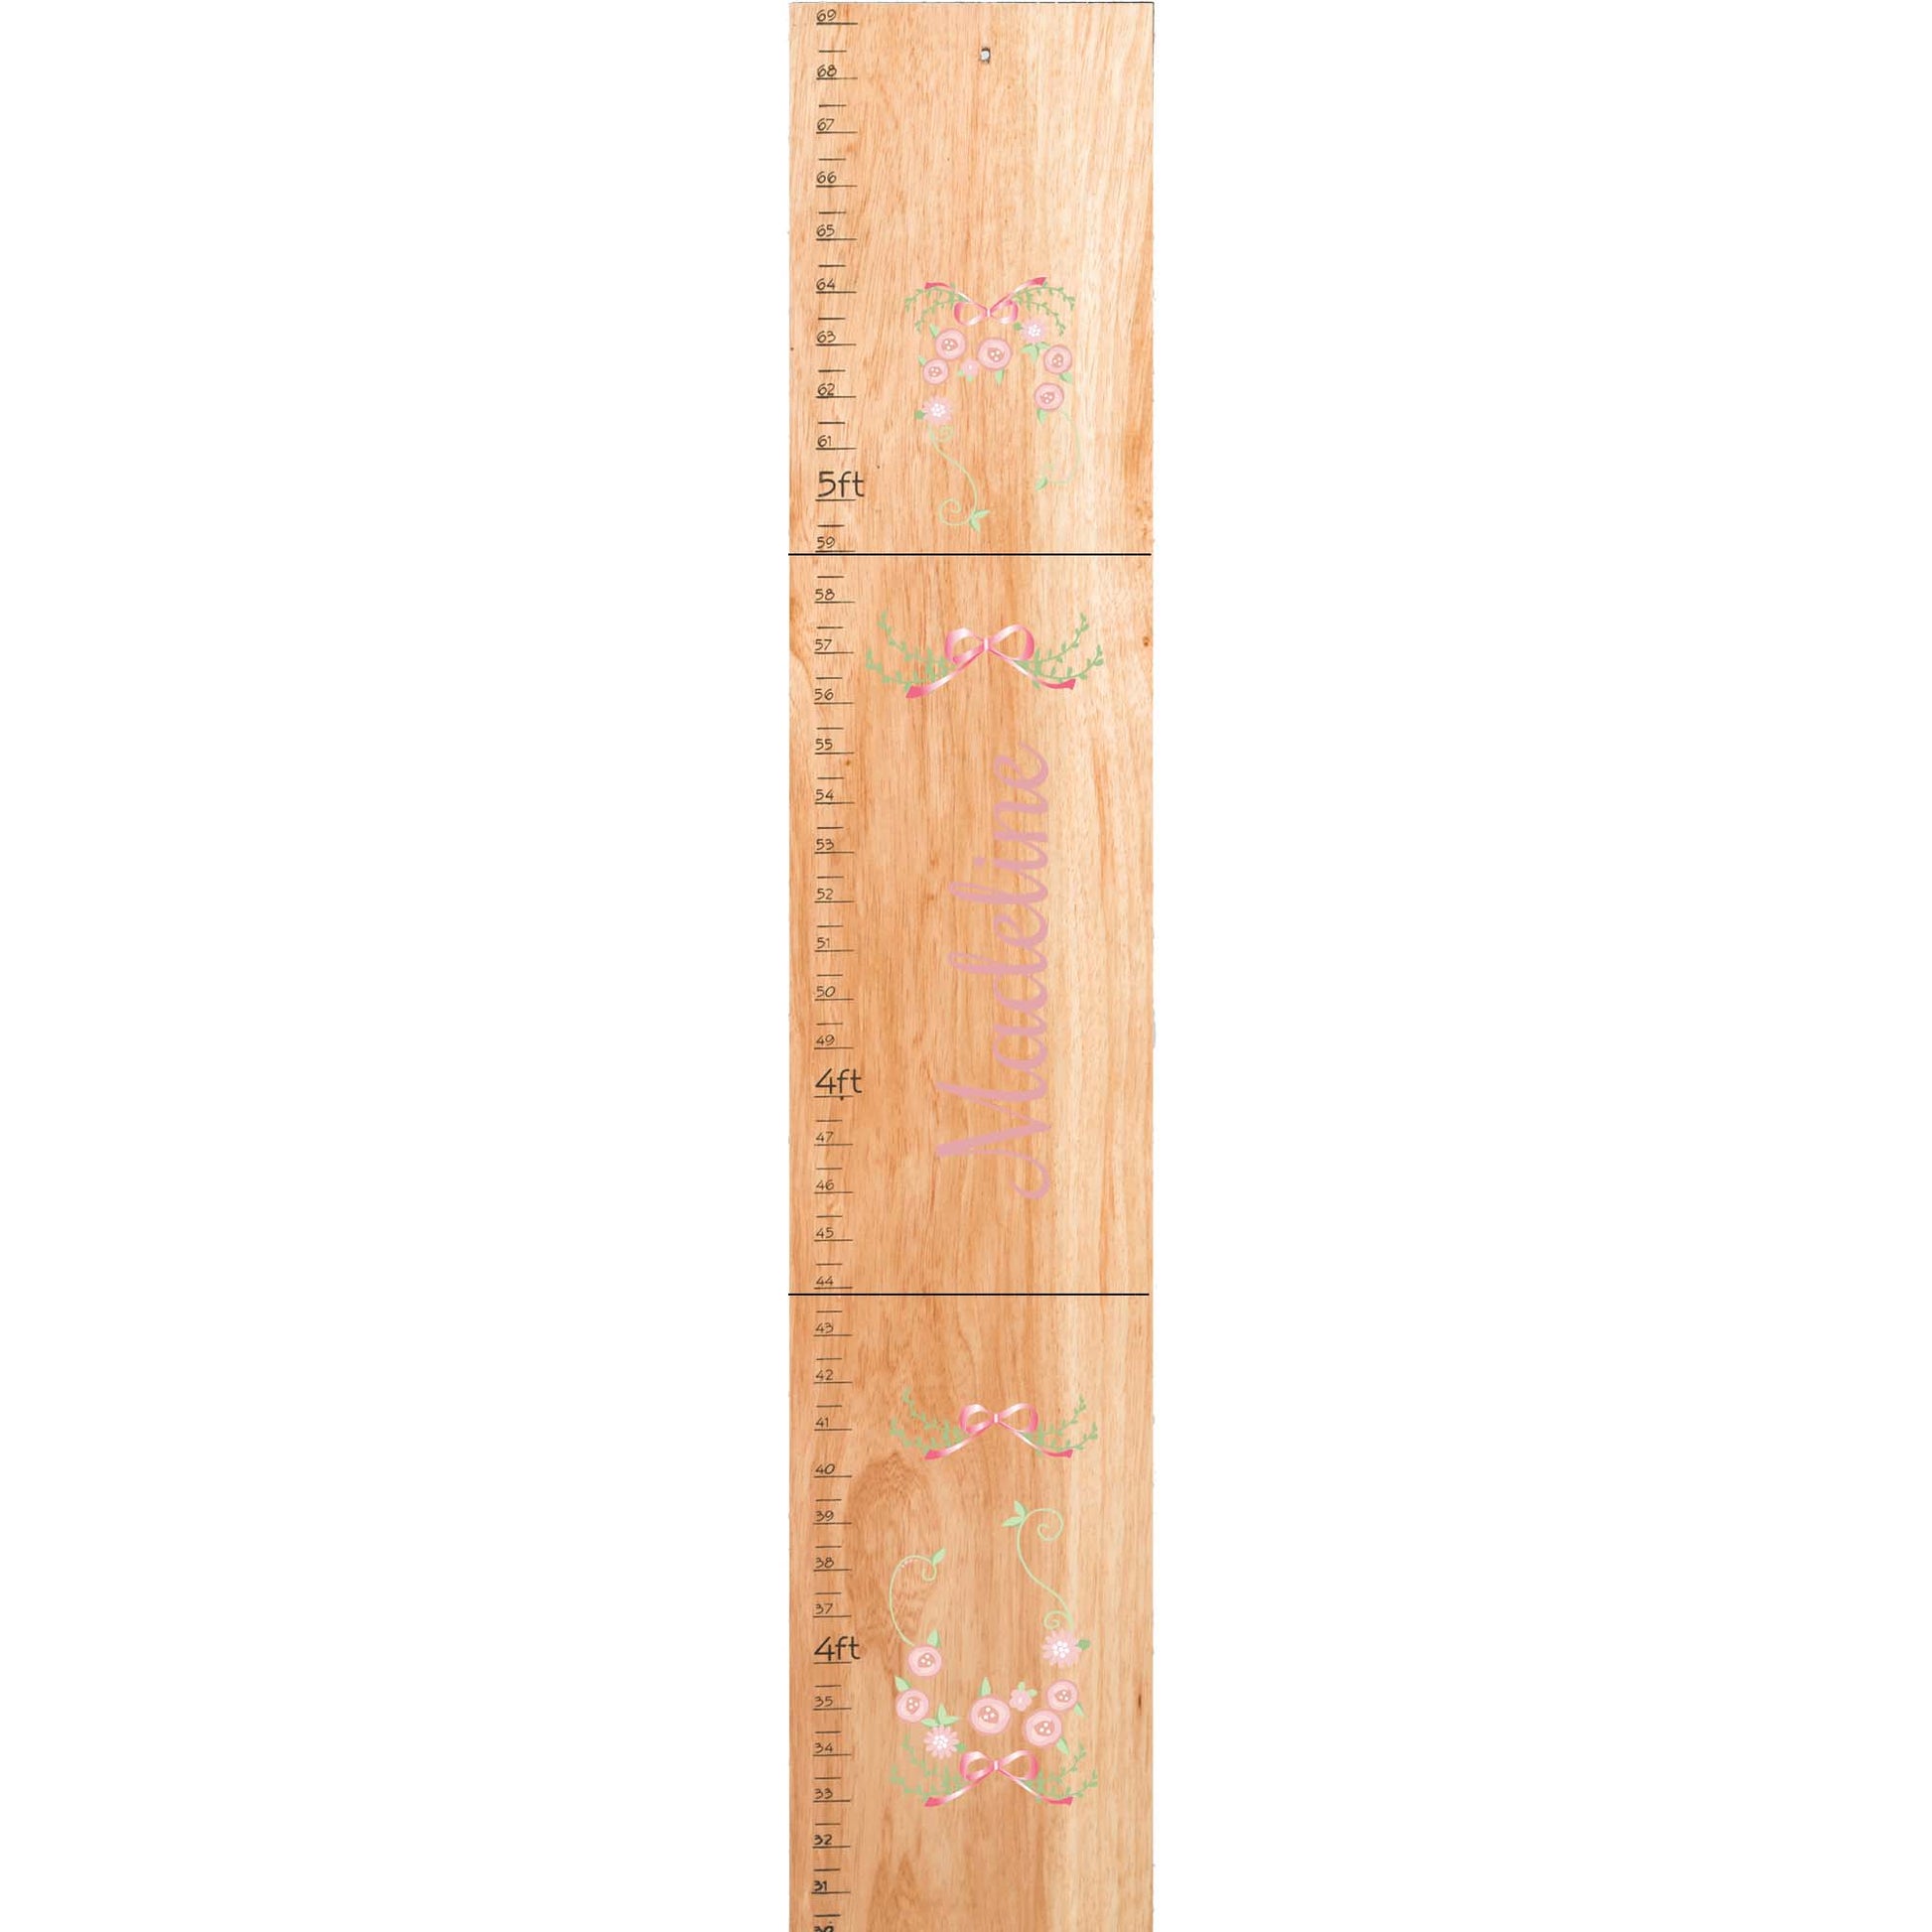 Personalized Natural Growth Chart With Garland Pink Gray Design